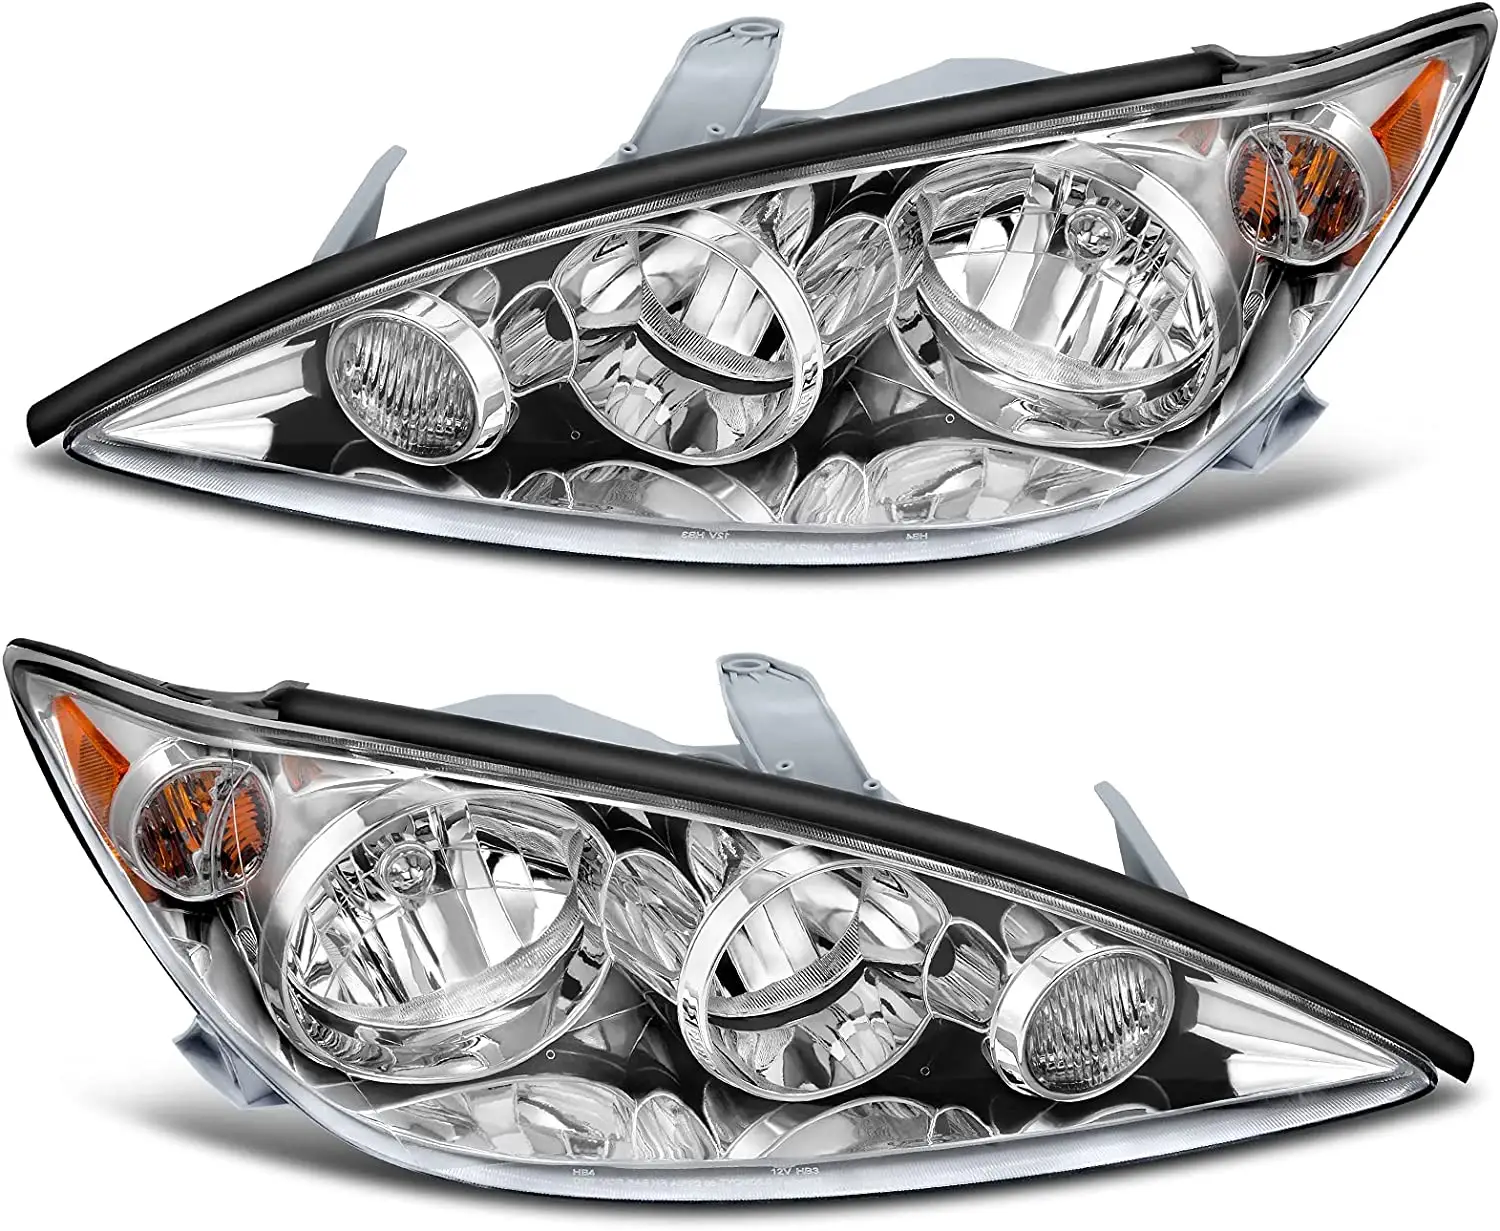 Headlight Assembly for Toyota Camry 2005-2006 Headlights Replacement Halogen Chrome Driver and Passenger Side